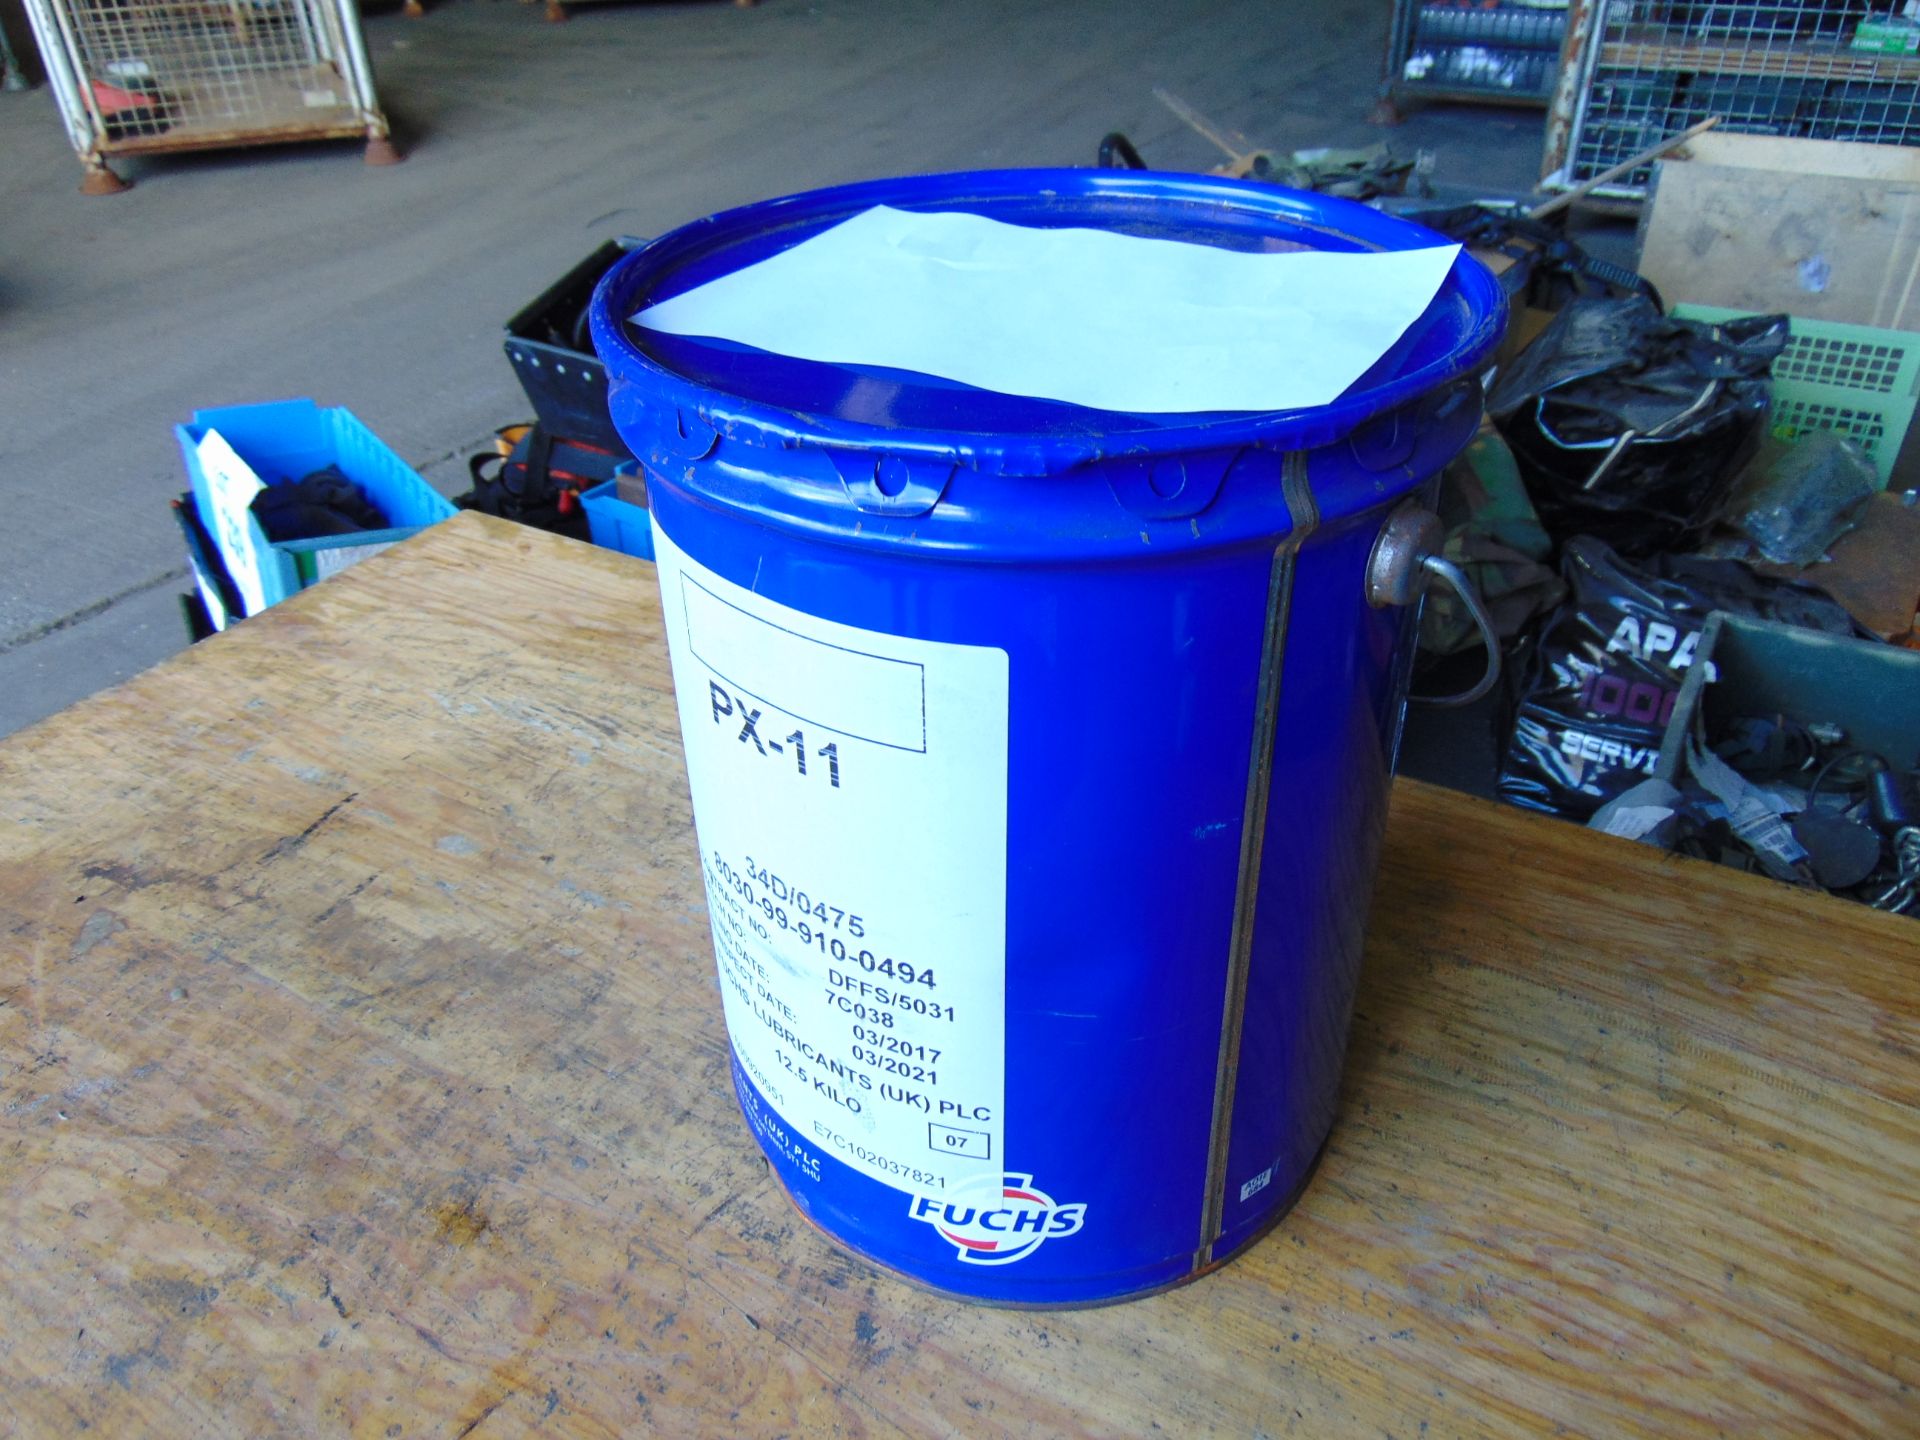 1 x 20 Litre Drum PX-11 Protection Oil for Weapons, Vehicles etc - Image 2 of 5